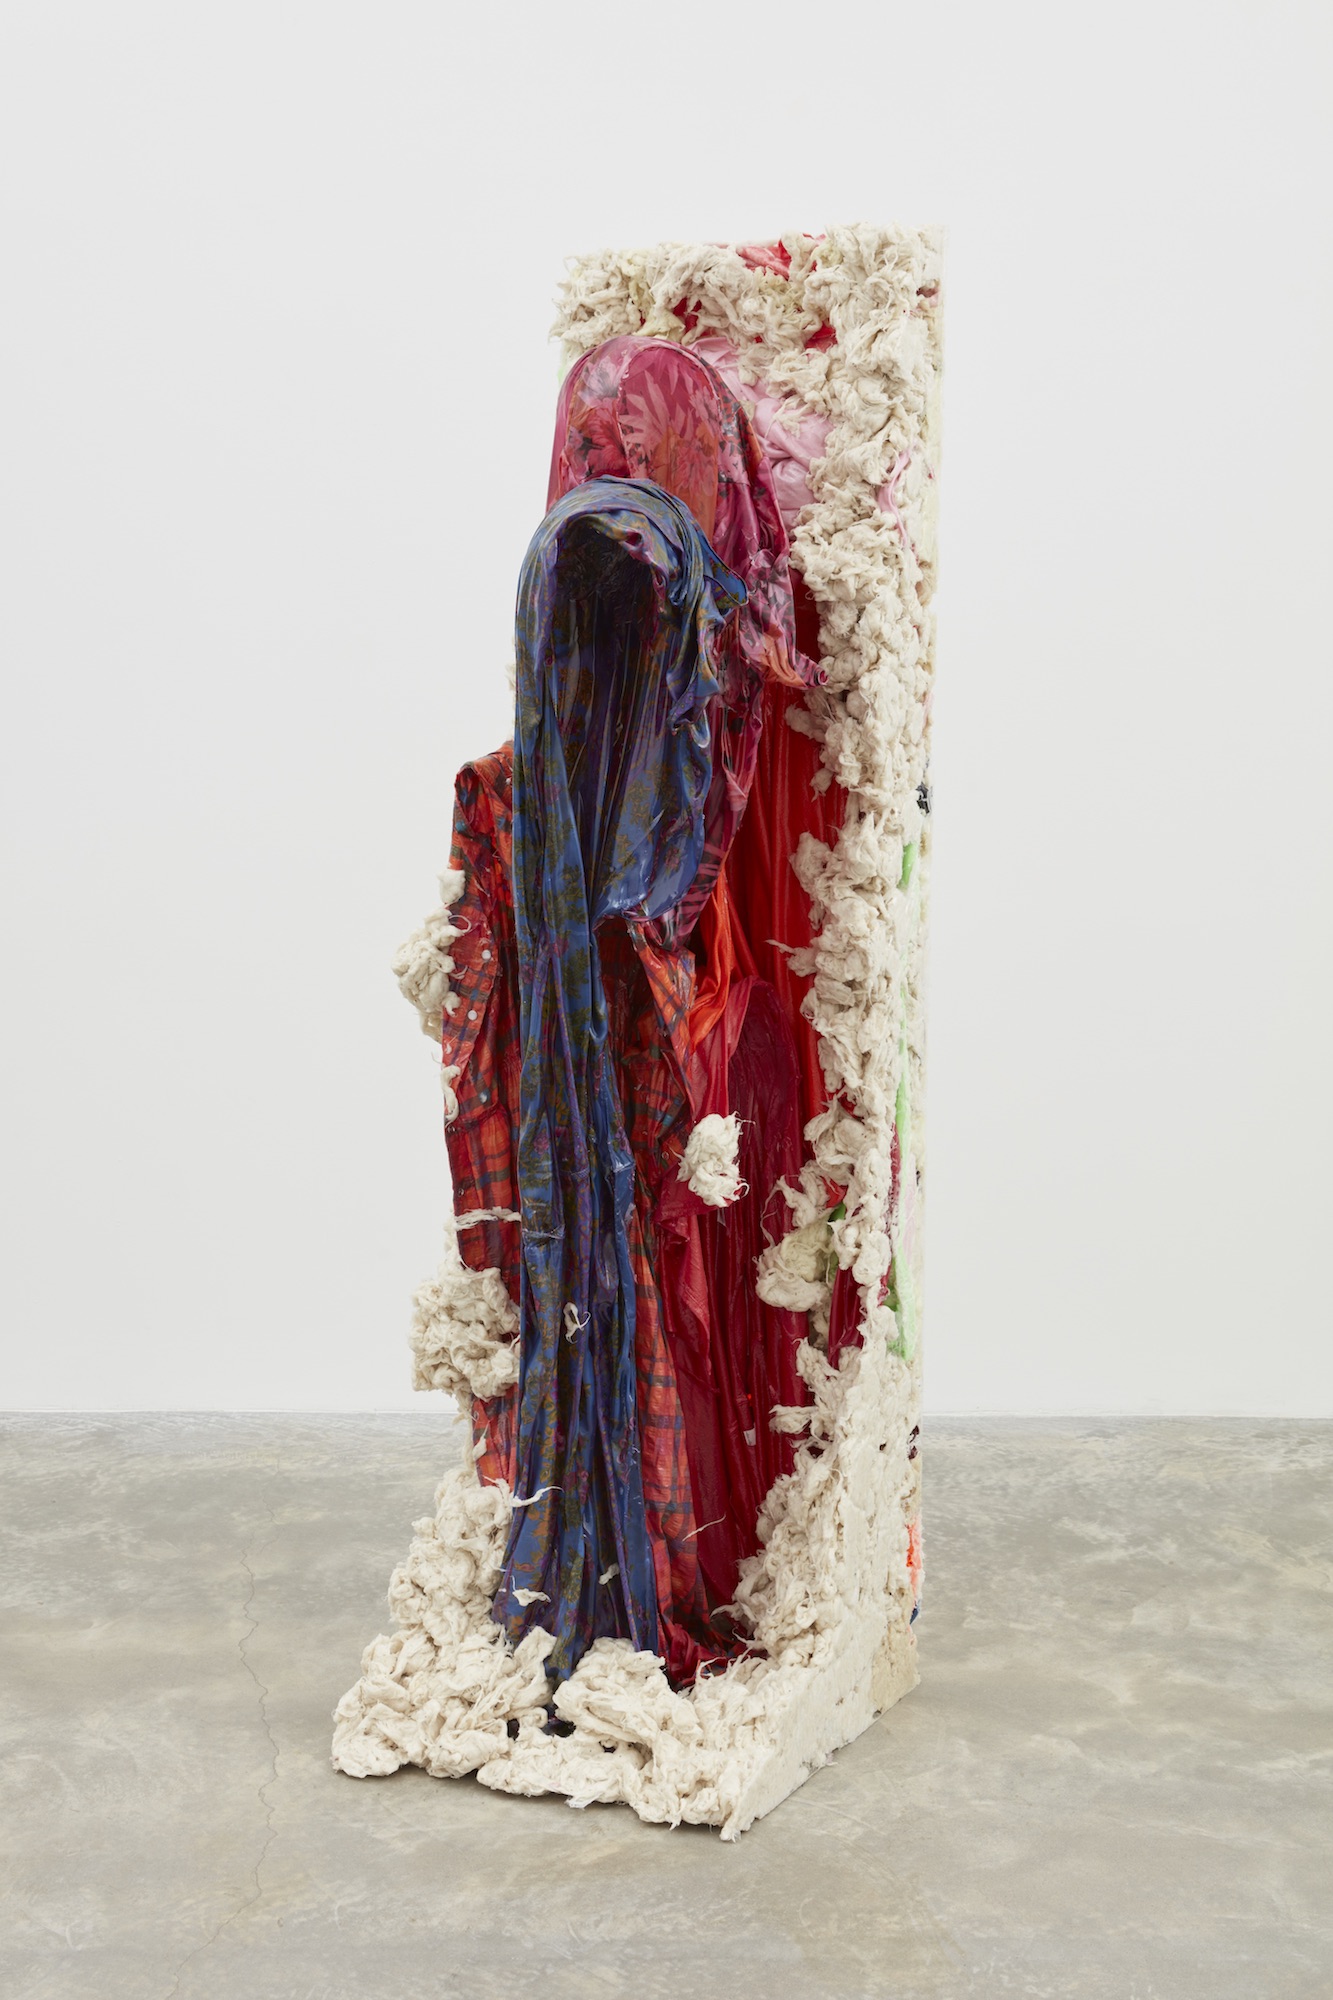 A polyurethane resin coated kaftan sculpture cast in a shape of a cloaked figure edged with raw cotton